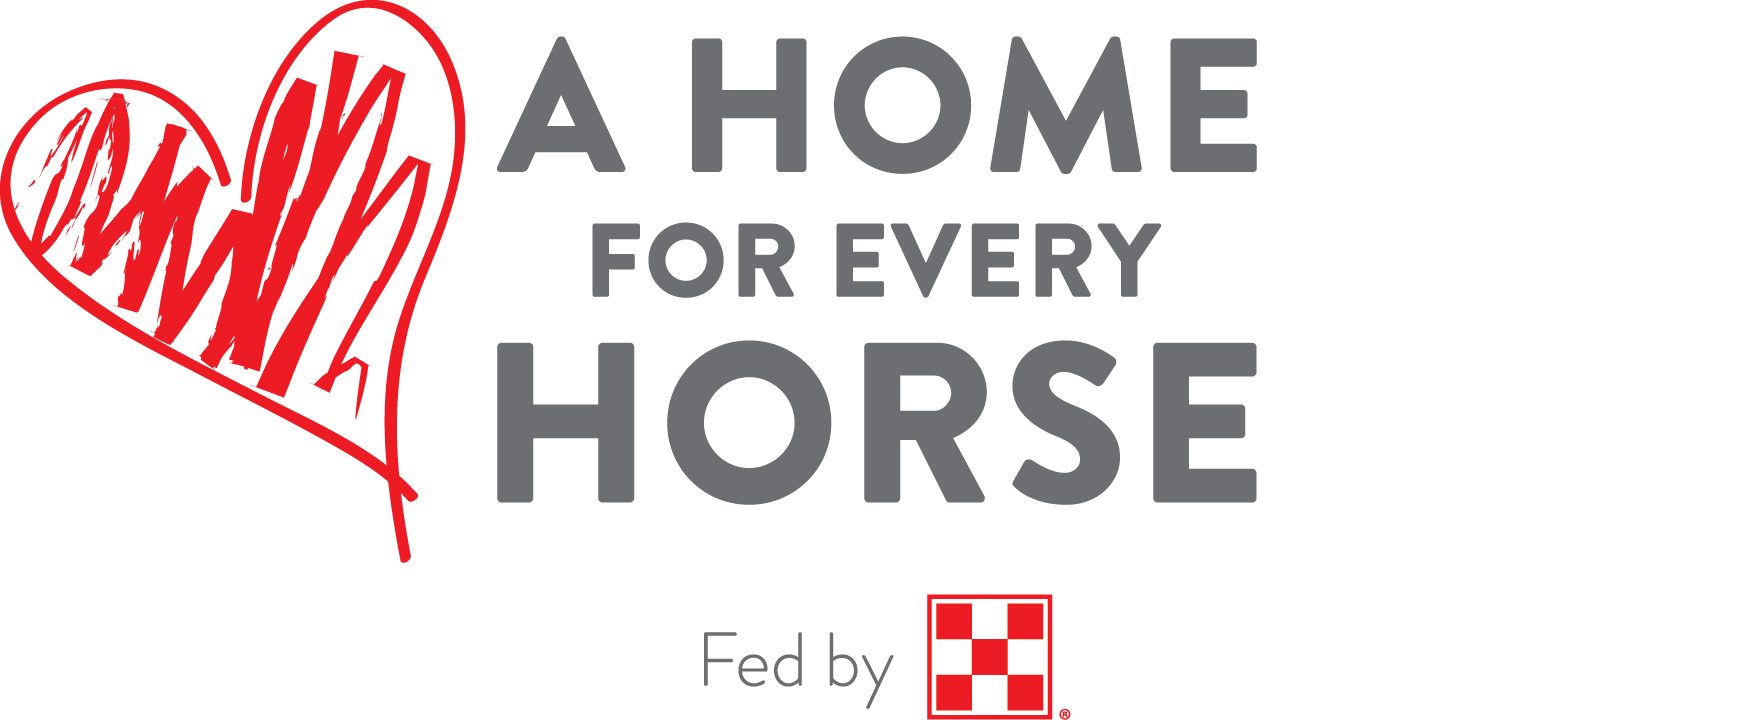 a home for every horse logo